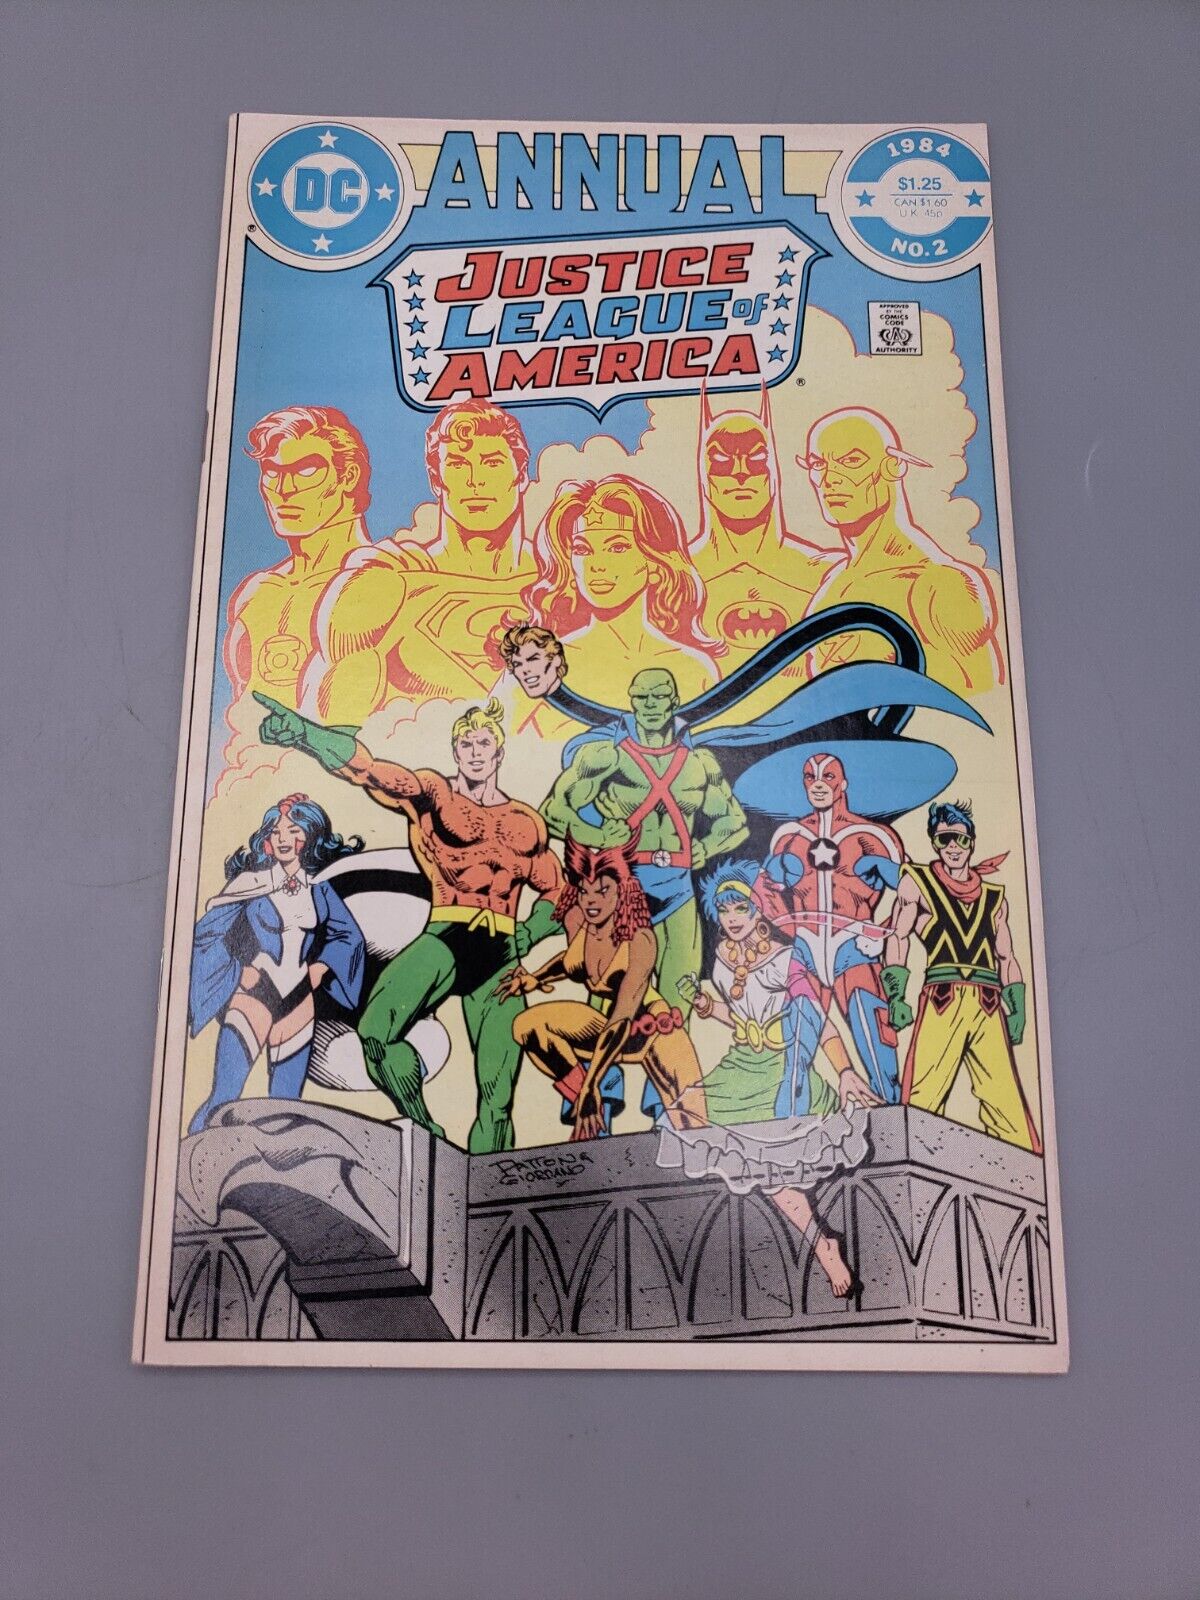 Vtg Justice League of America Annual Vol 1 #2 Oct 1984 Illustrated DC Comic Book